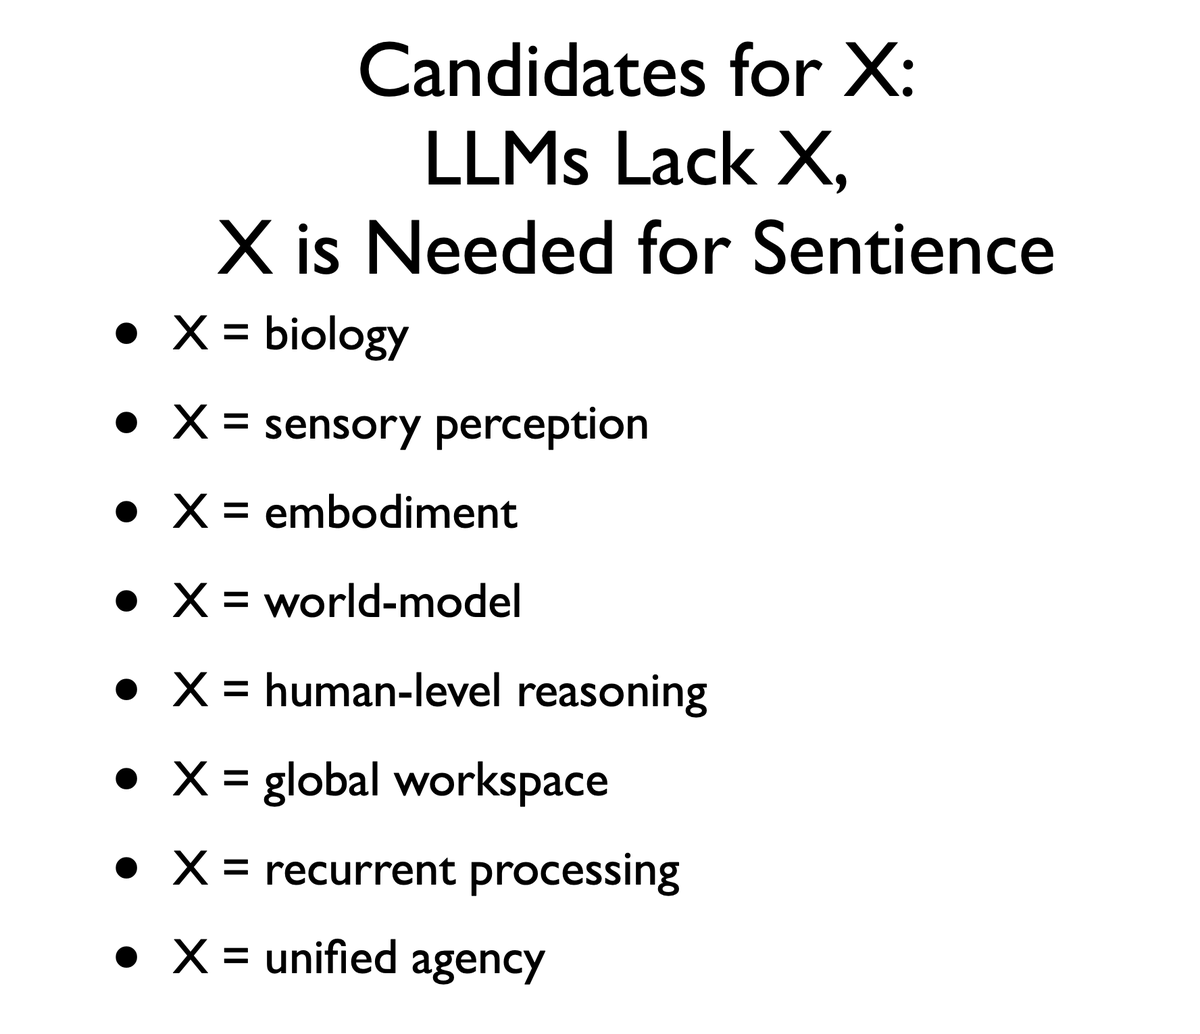 so, what's the best reason to think large language models are not sentient? more precisely: what's the best candidate for X such that LLMs clearly lack X and X is required for sentience?